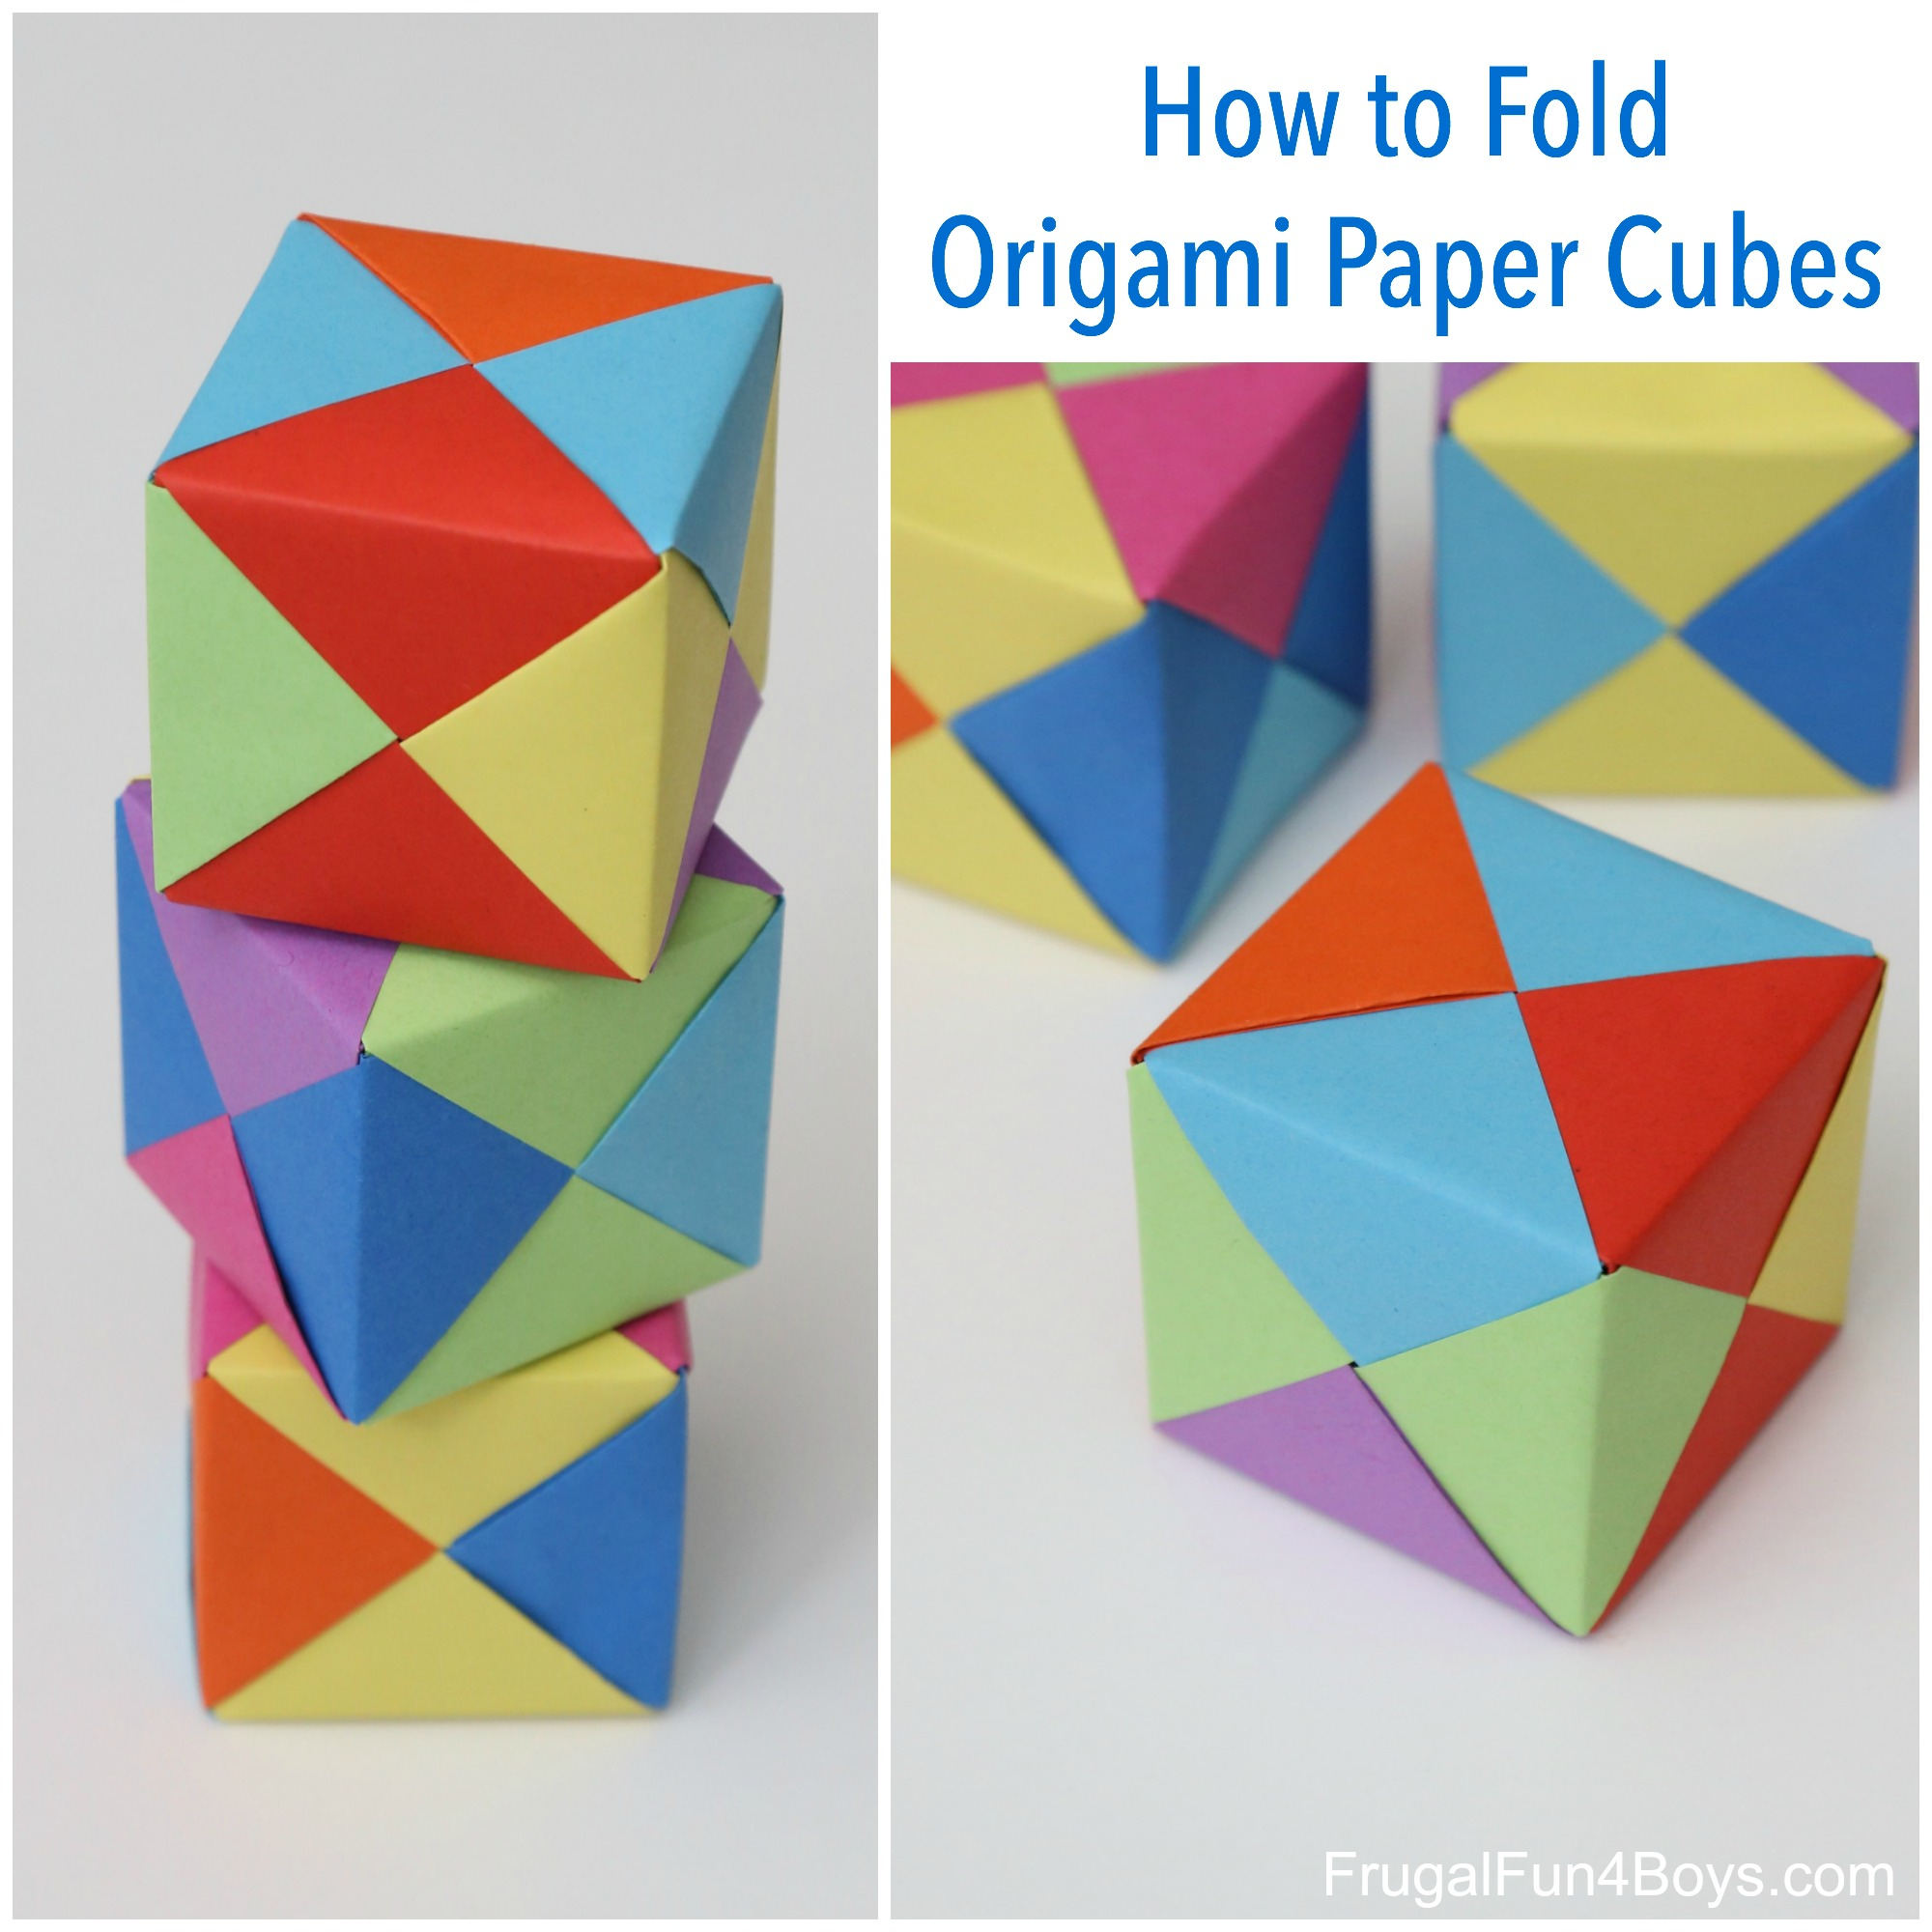 How To Make Origami Rocket How To Fold Origami Paper Cubes Frugal Fun For Boys And Girls